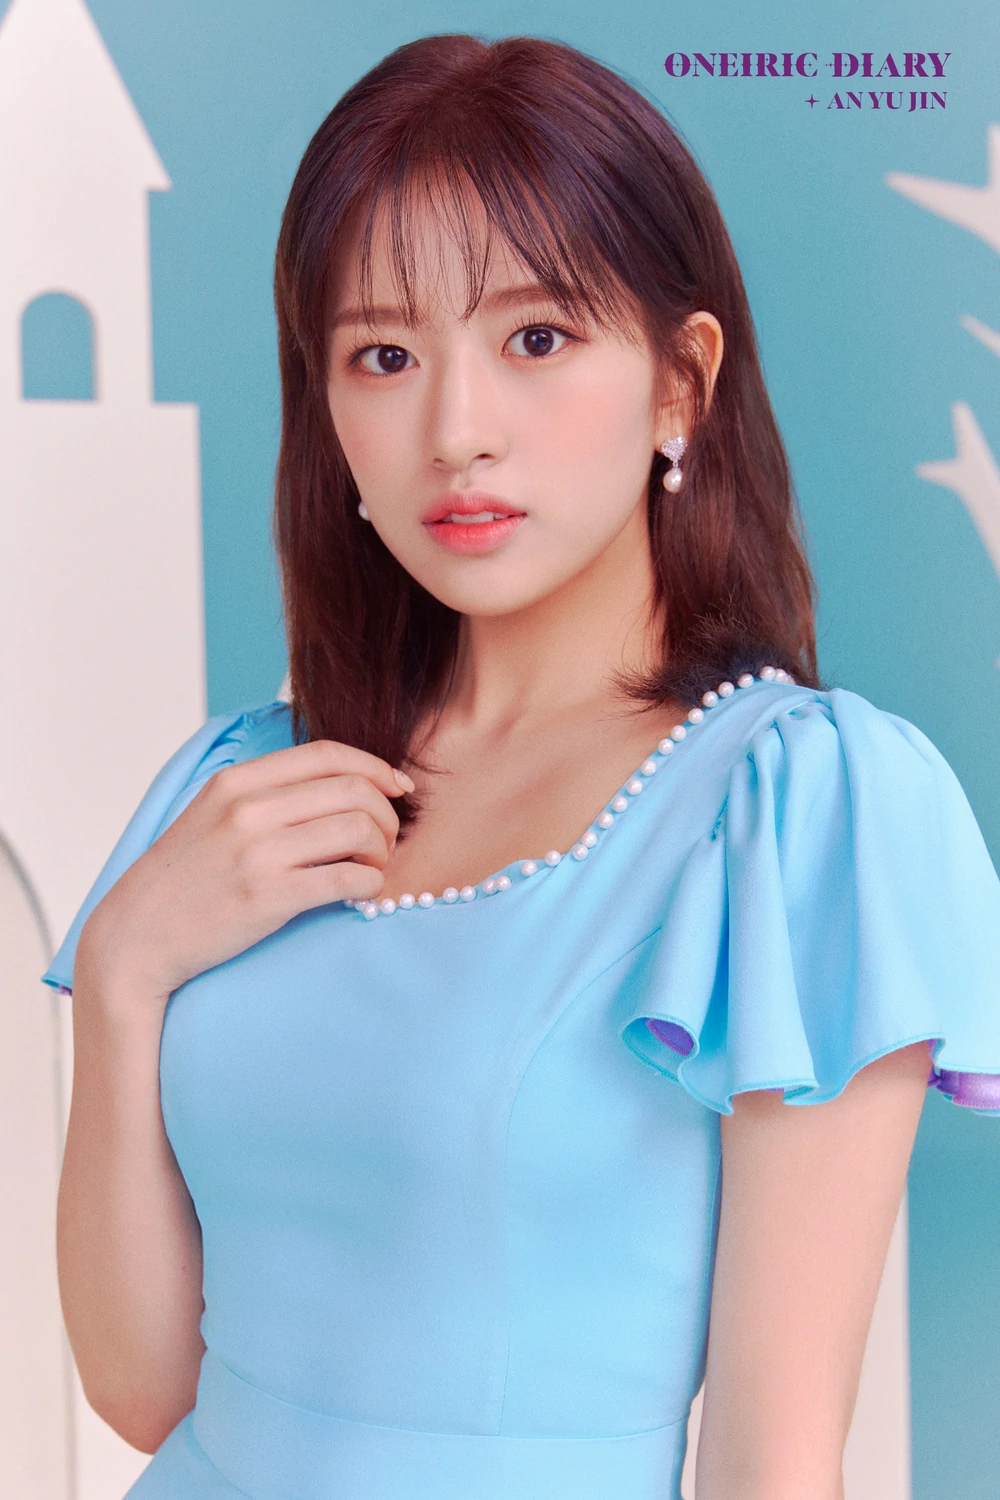 IZ*ONE Oneiric Diary Yujin Concept Teaser Picture Image Photo Kpop K-Concept 4